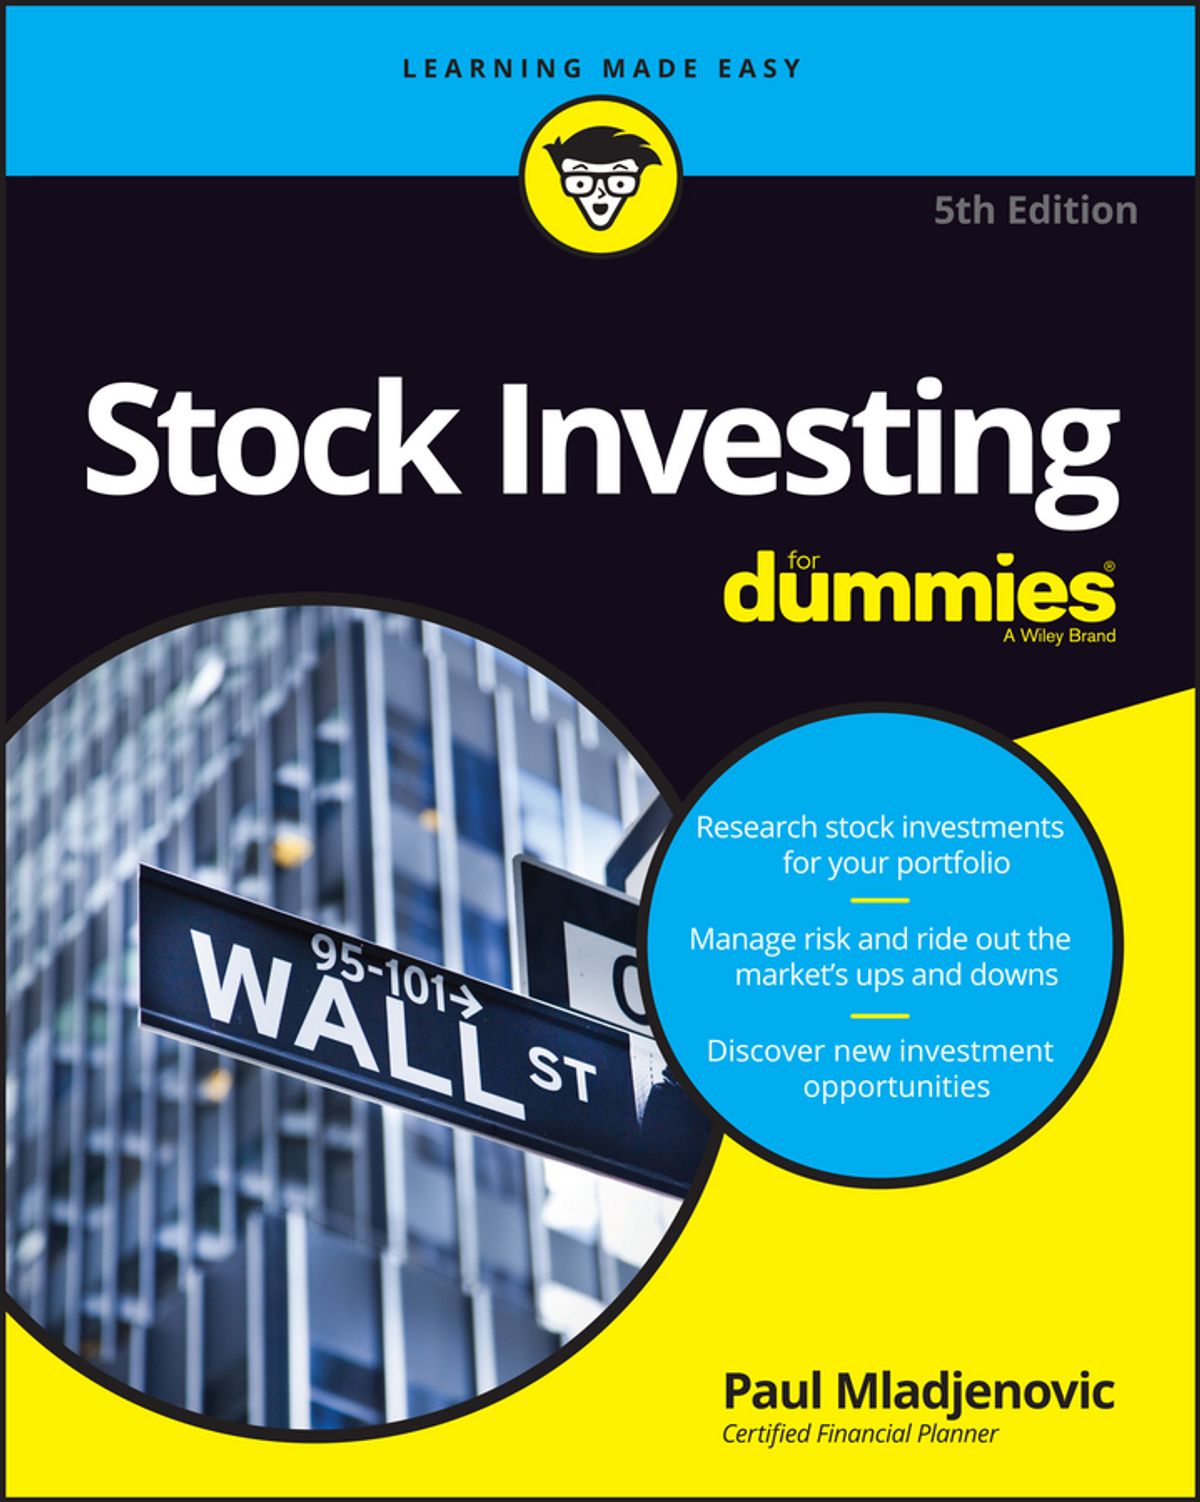 Stock Investing For Dummies 5th Edition PDF Free Knowdemia